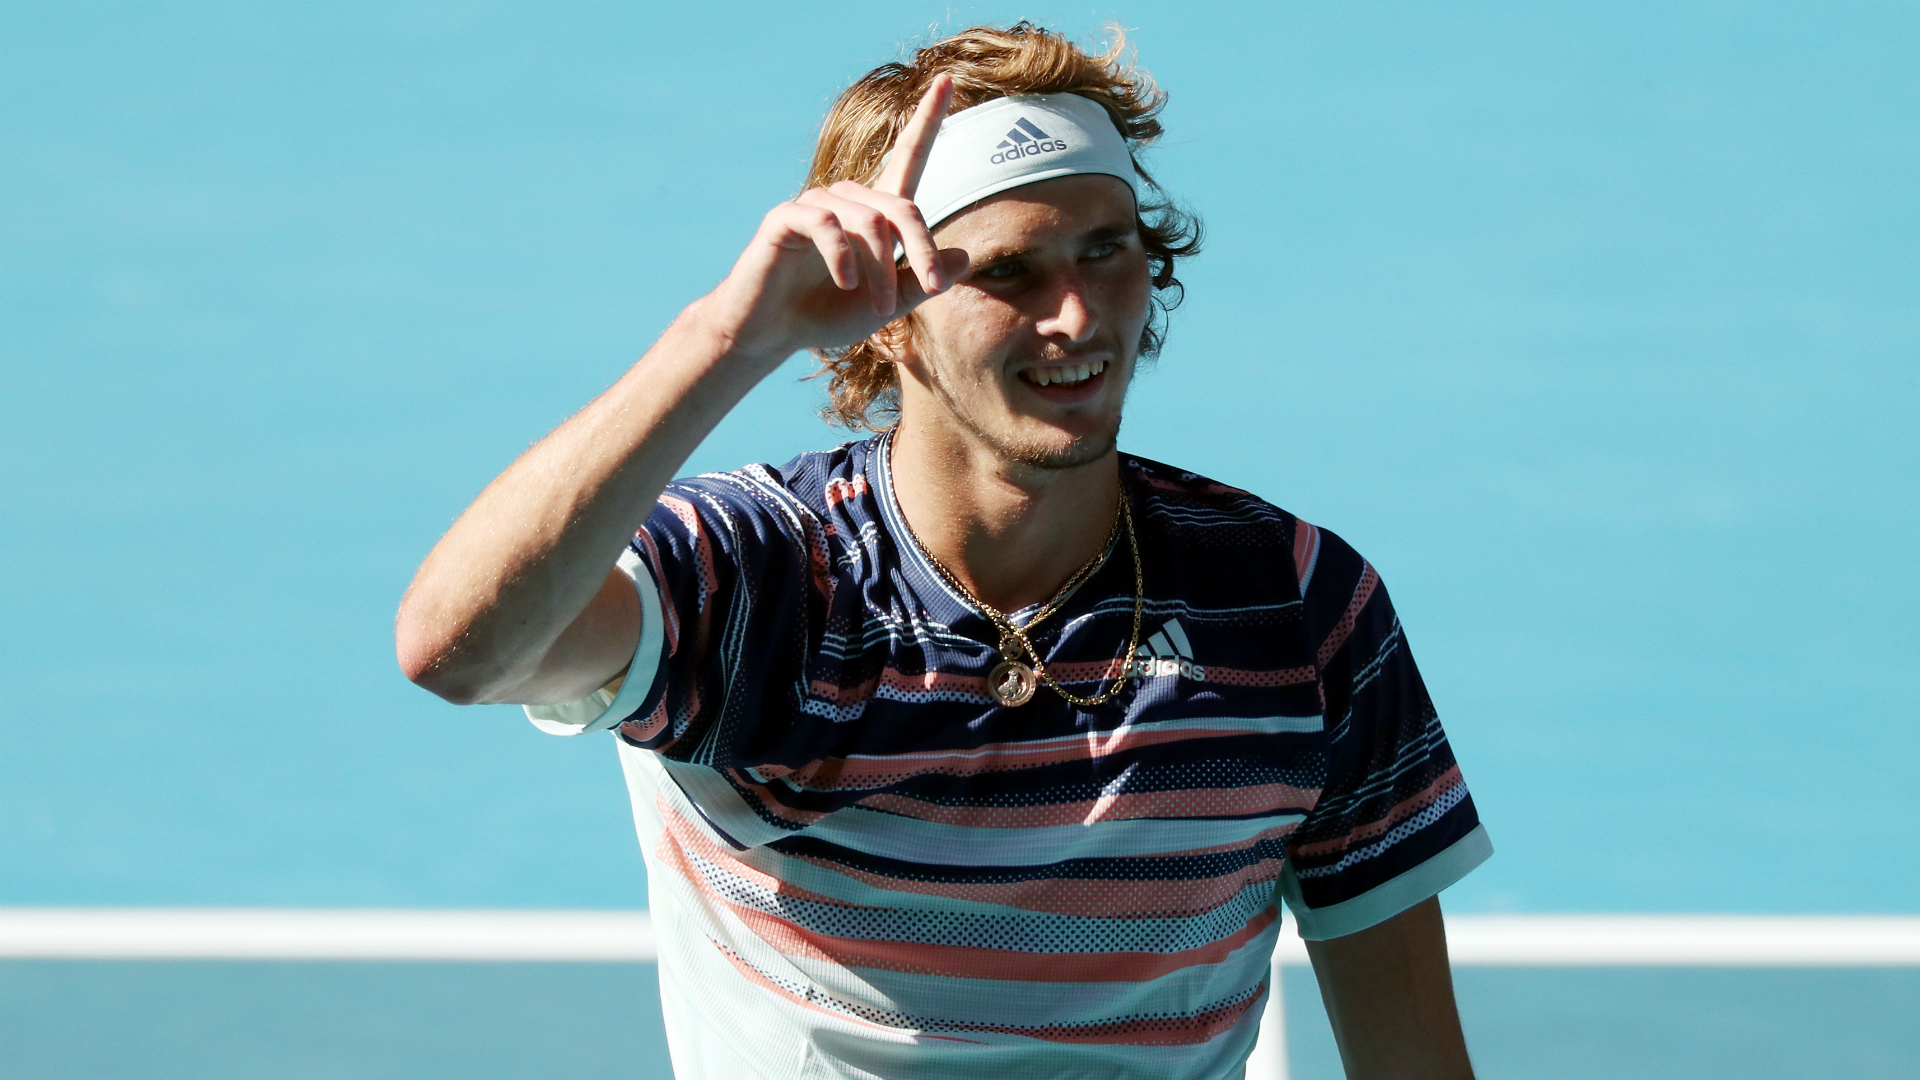 Alexander Zverev is a man of his word after advancing to the semi-finals of the Australian Open on Wednesday.